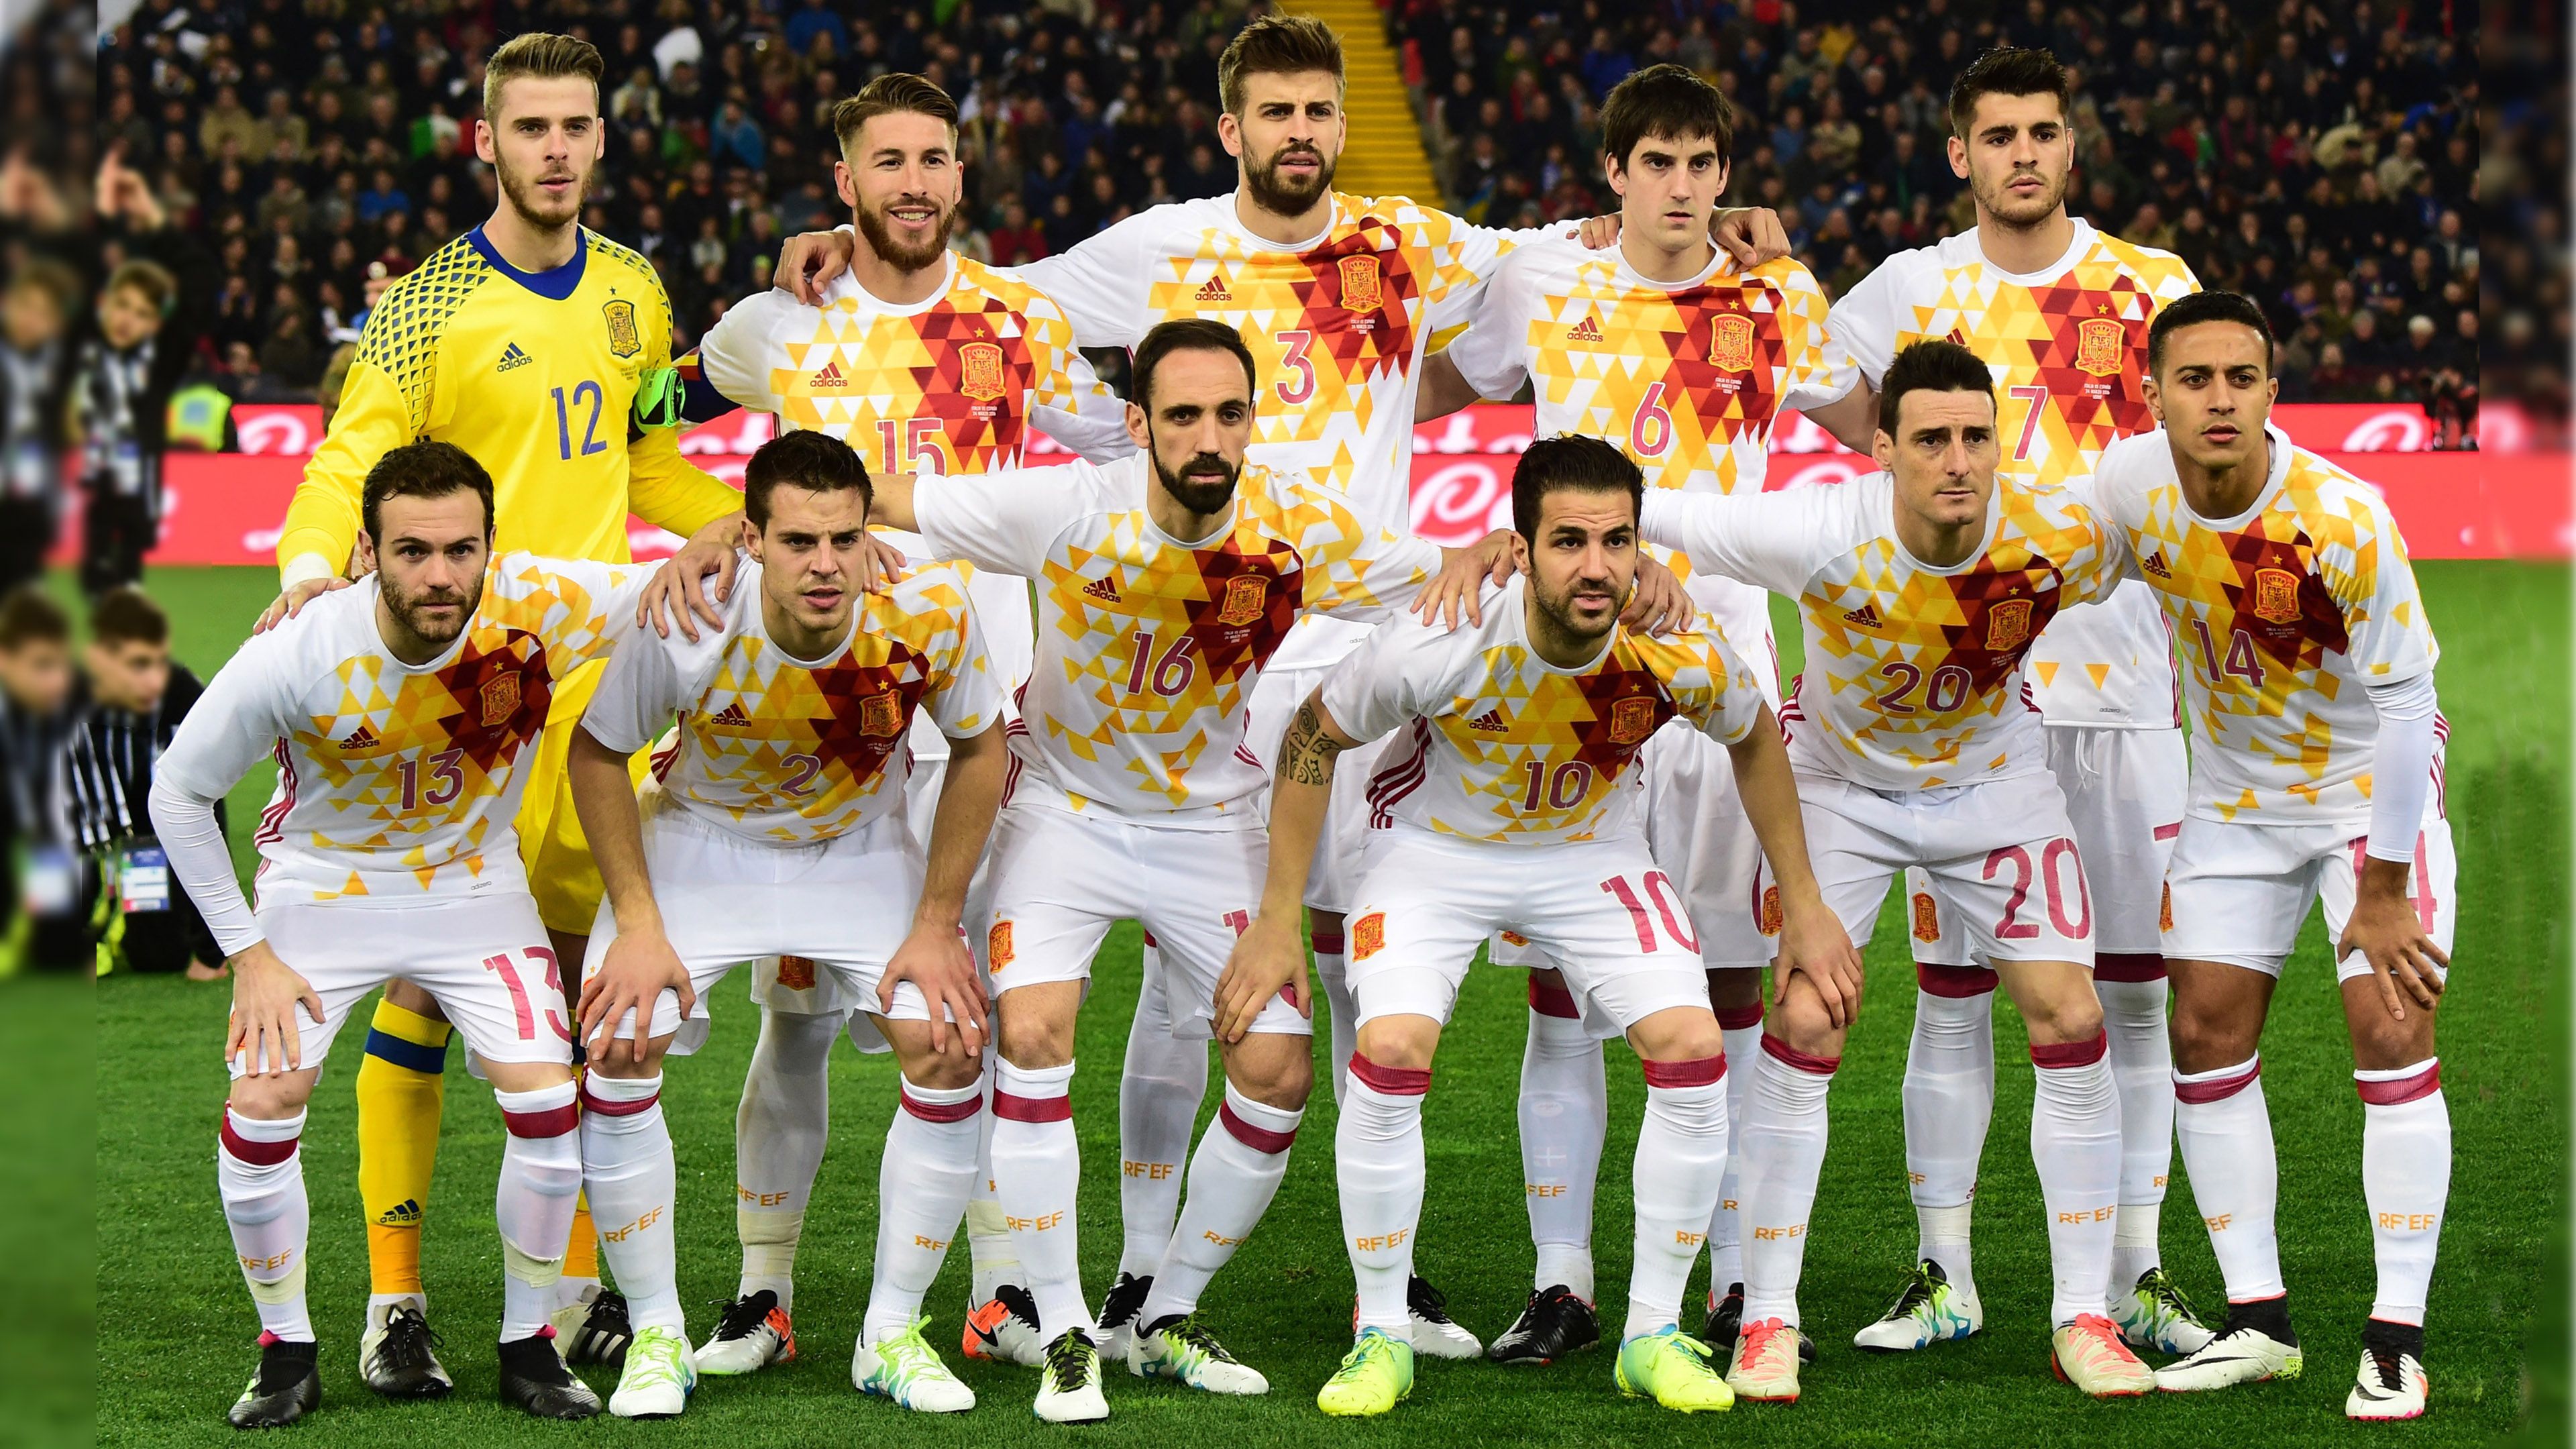 Spain national football team Wallpaper and Background Image